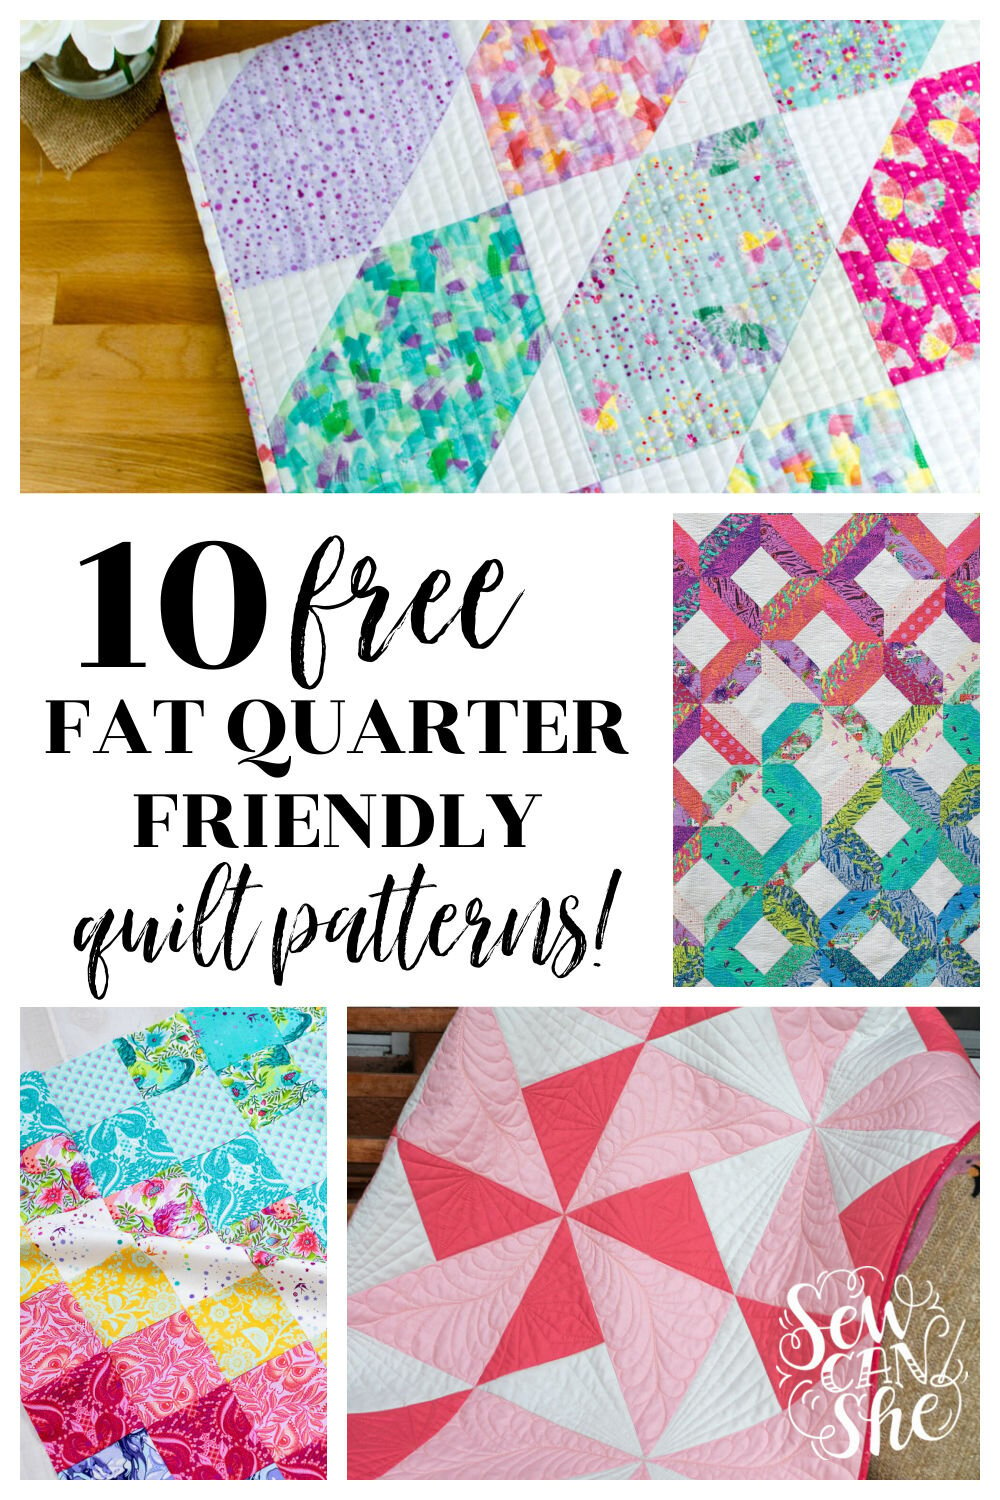 What Size Quilt Can You Make With 12 Fat Quarters?